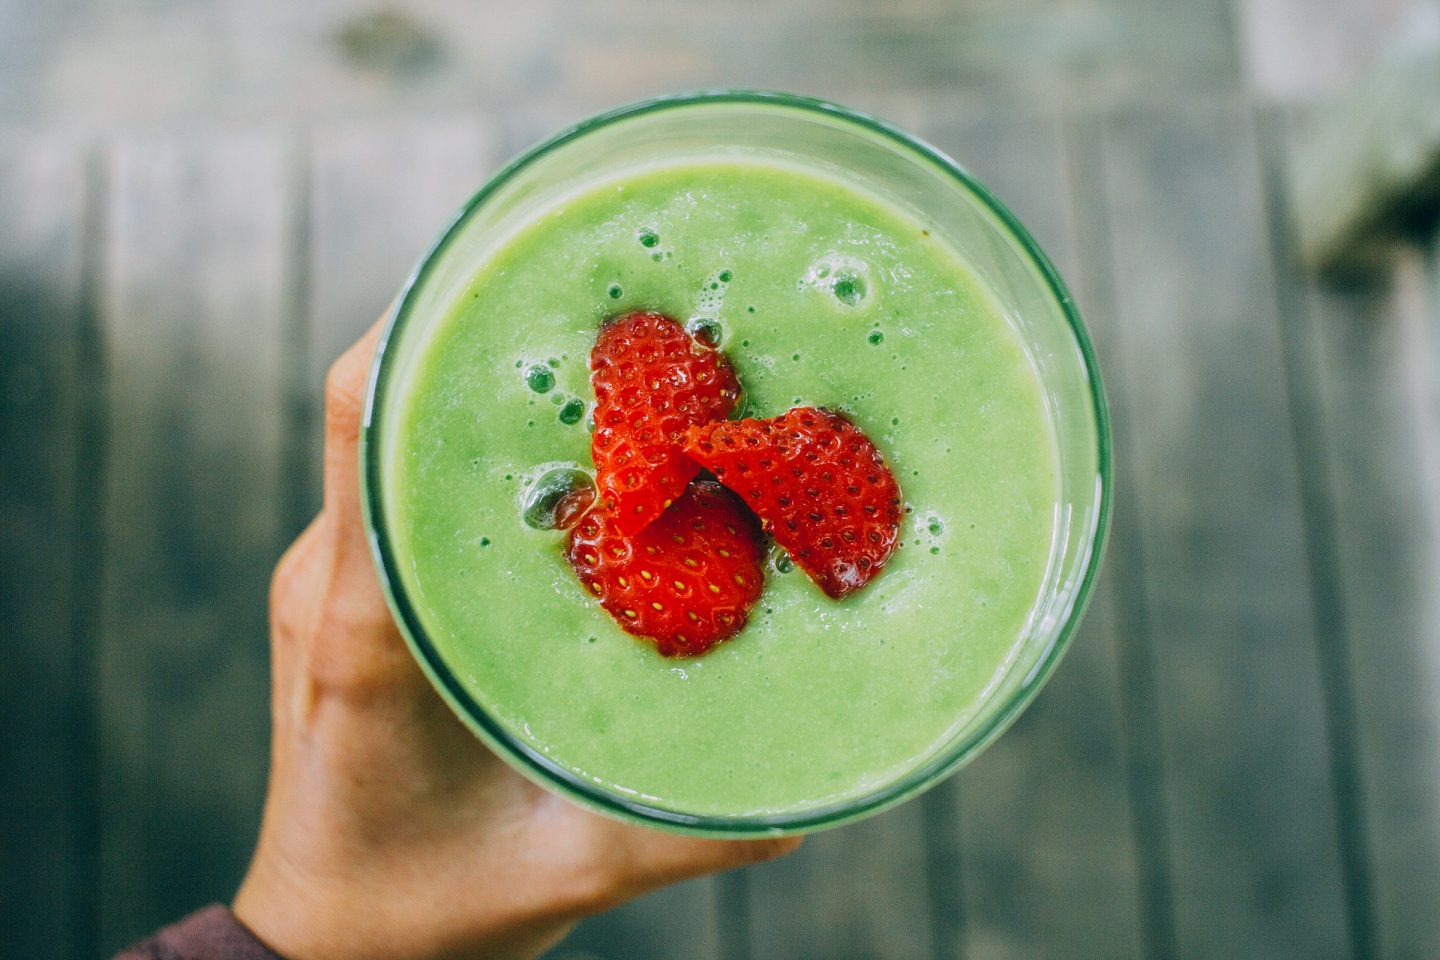 A birds-eye view of someone holding a glass. We see the green, thick smoothie and some chopped red strawberries in the middle of the drink.